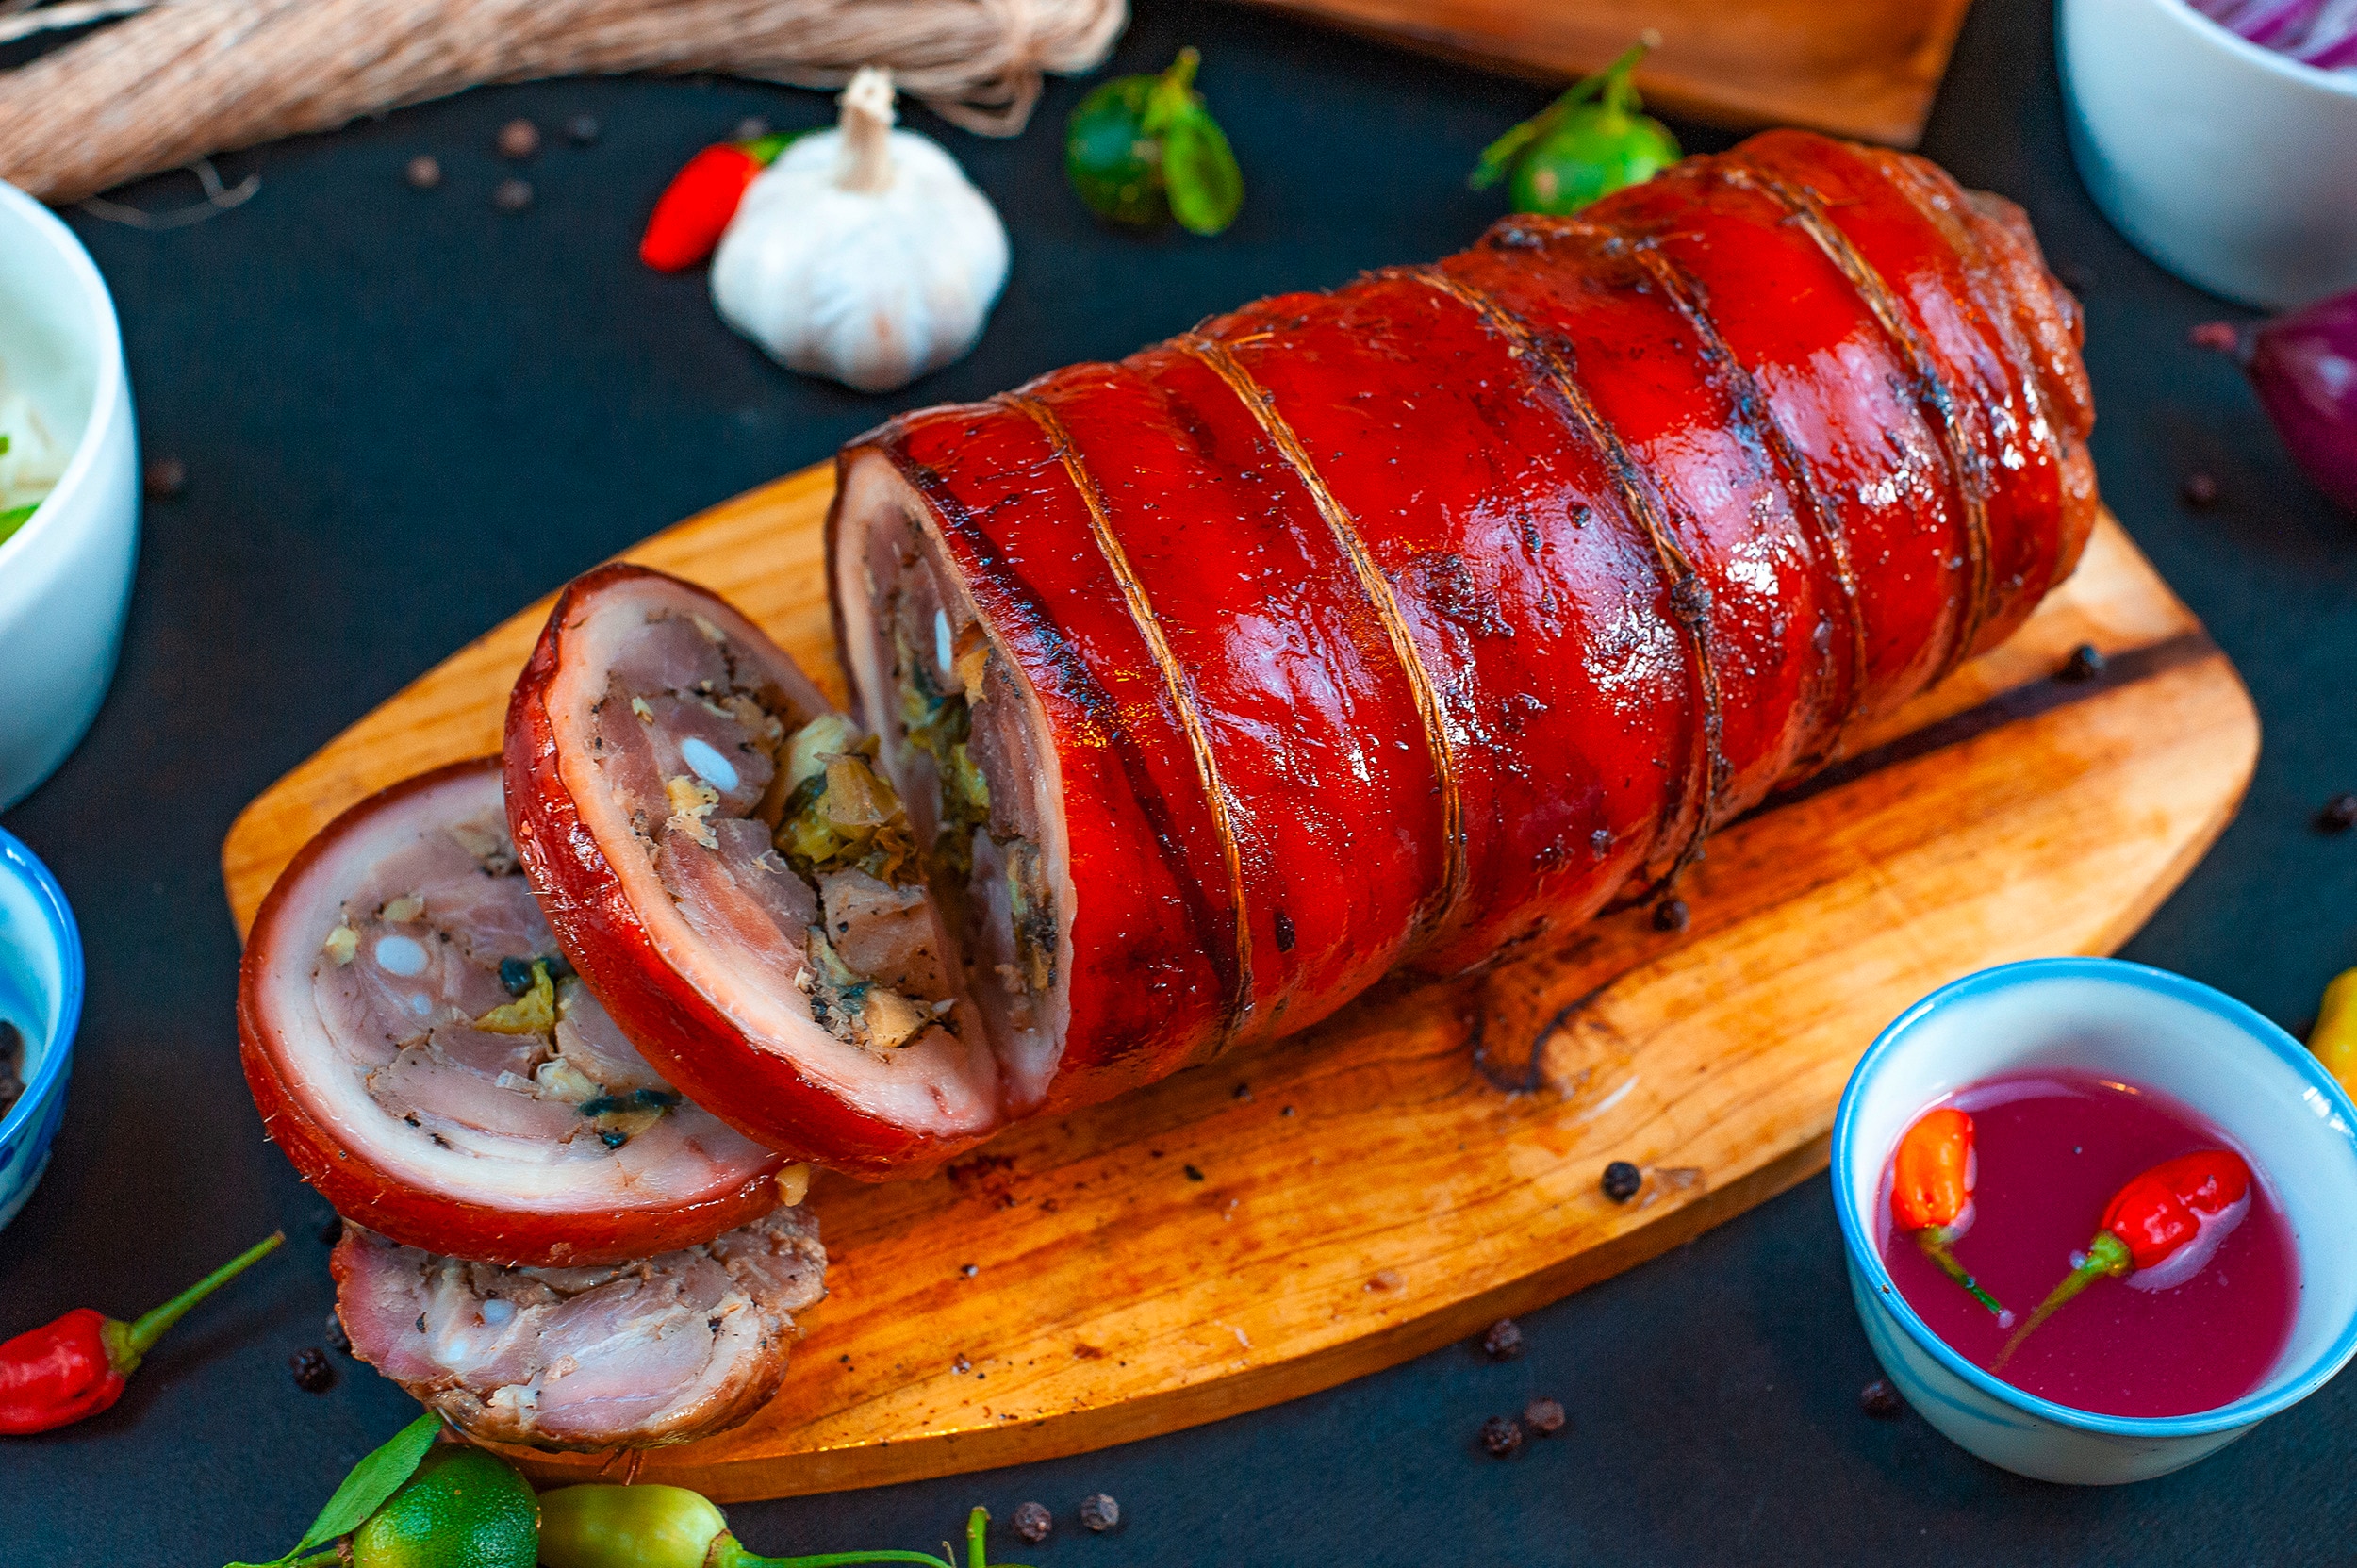 A wooden board with roasted and stuffed lechon belly roll